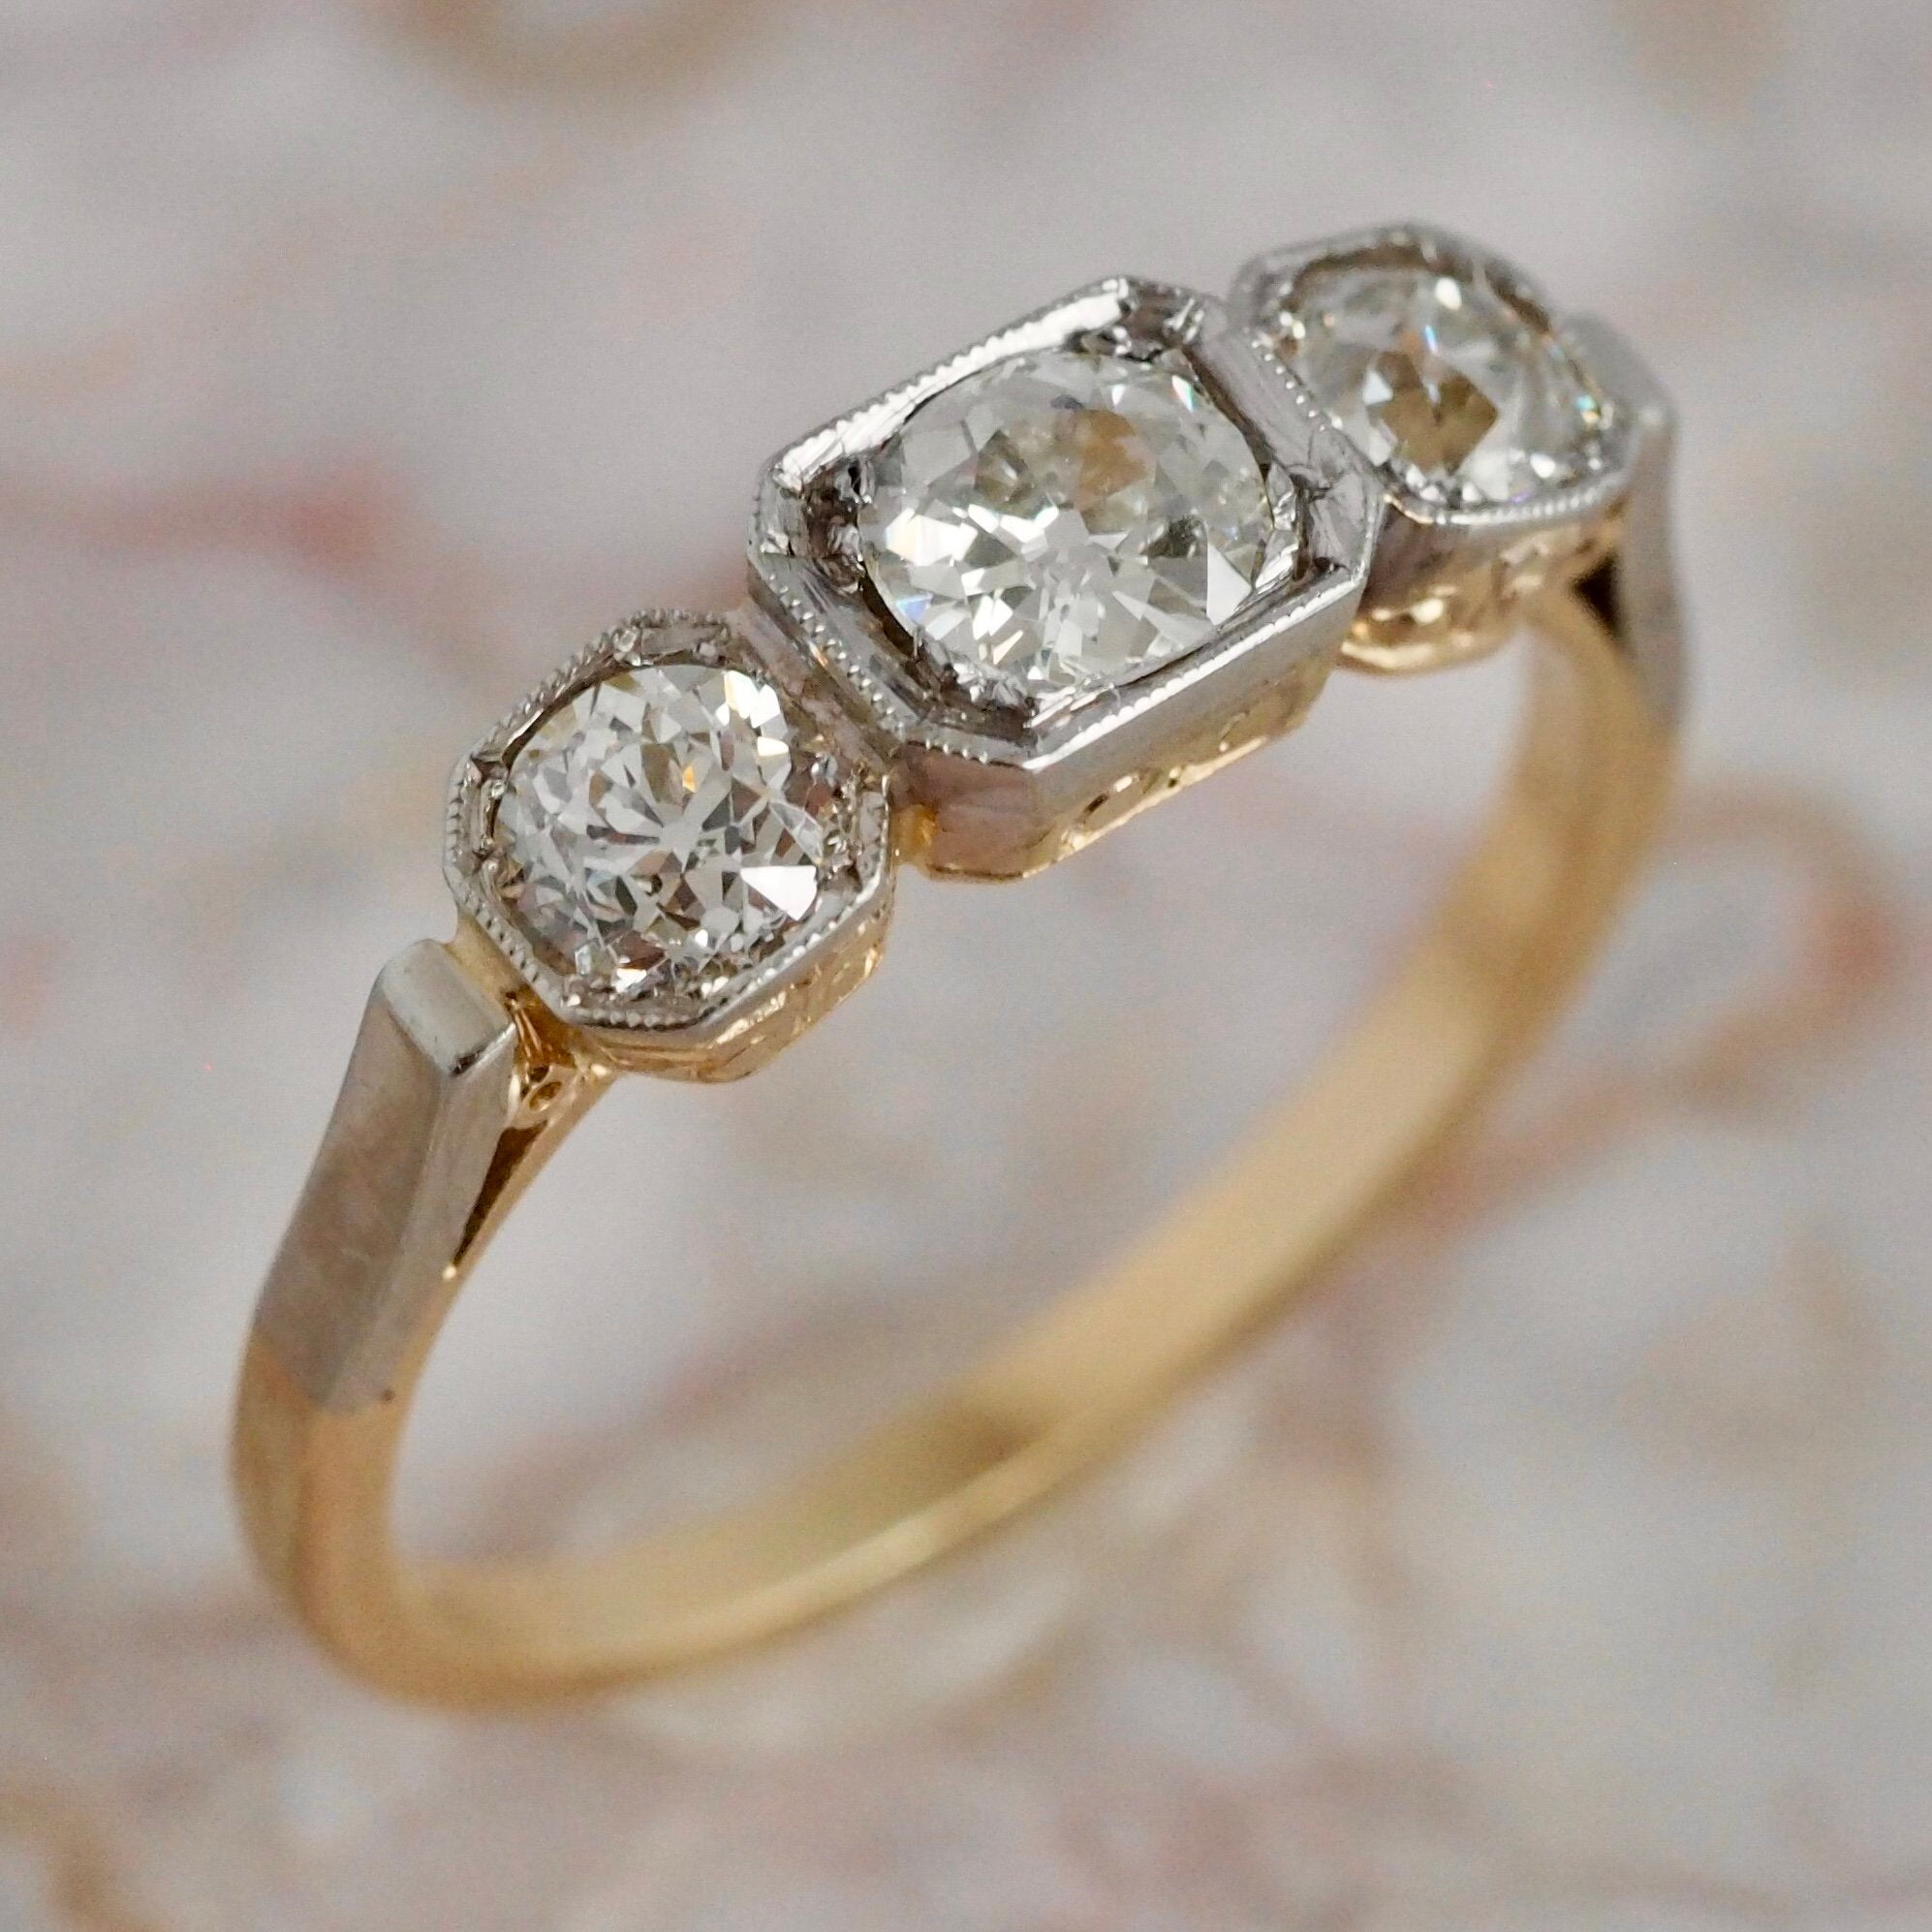 Early Art Deco 14k Gold Old European Cut Diamond Trilogy Engagement Ring